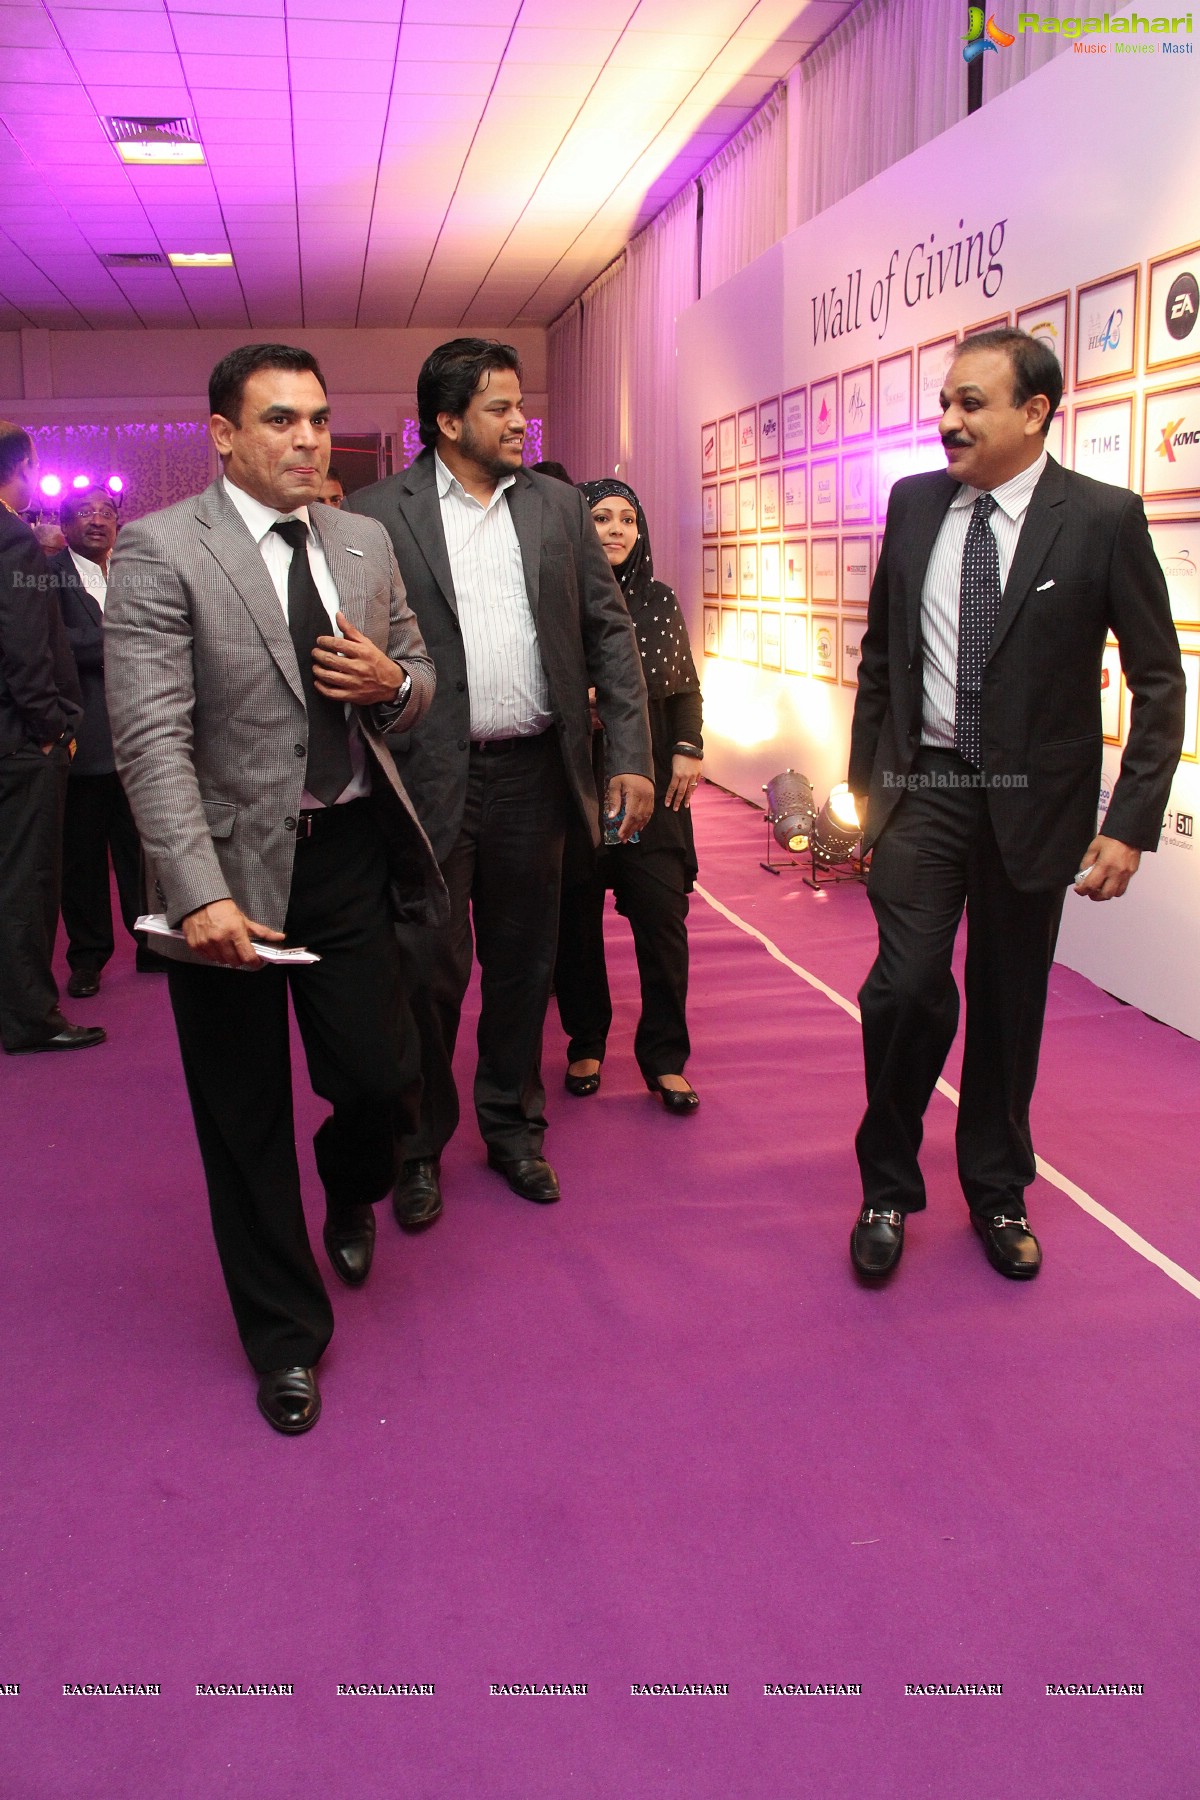 Project 511: Food For Change - A Black Tie Dinner For The Who's Who at N Convention, Hyderabad